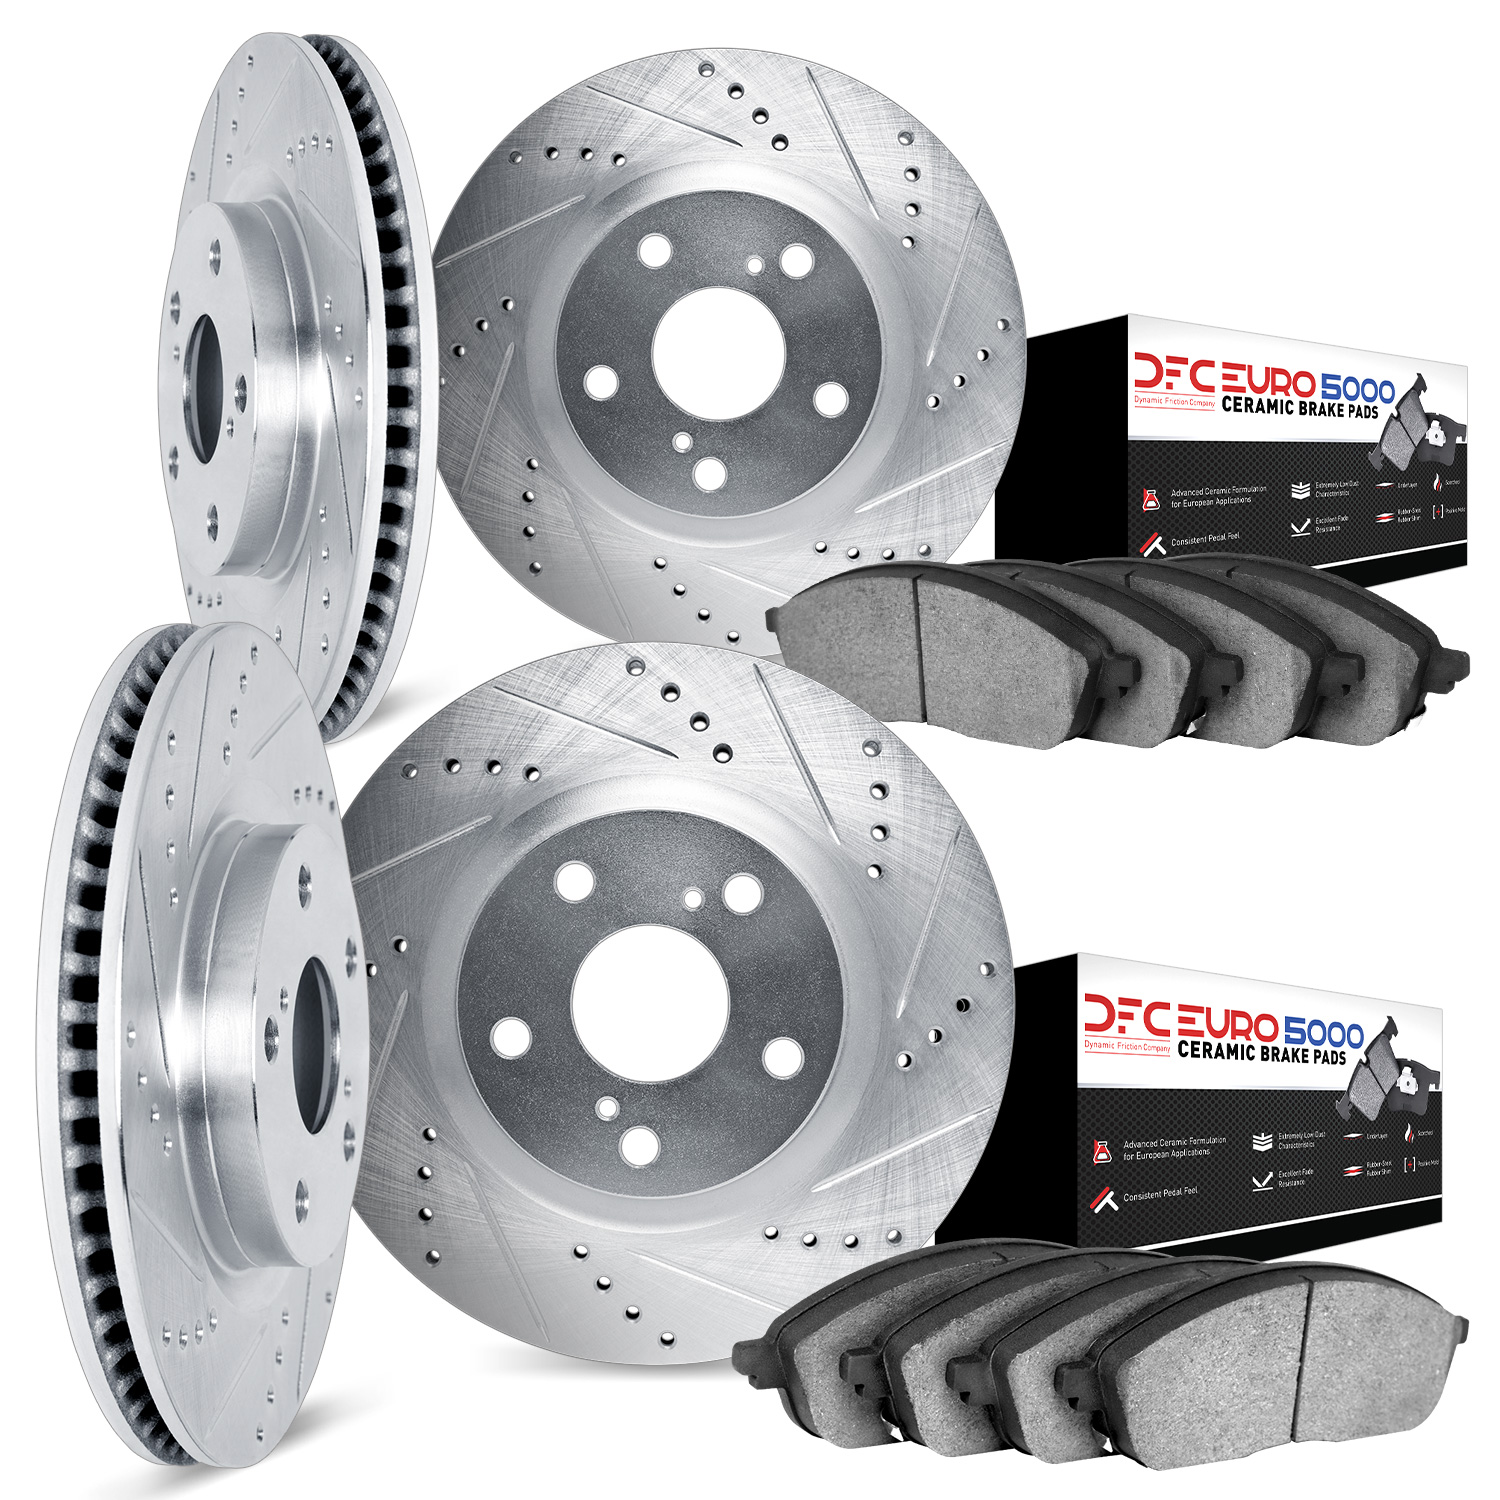 7604-31006 Drilled/Slotted Brake Rotors w/5000 Euro Ceramic Brake Pads Kit [Silver], 1988-1994 BMW, Position: Front and Rear